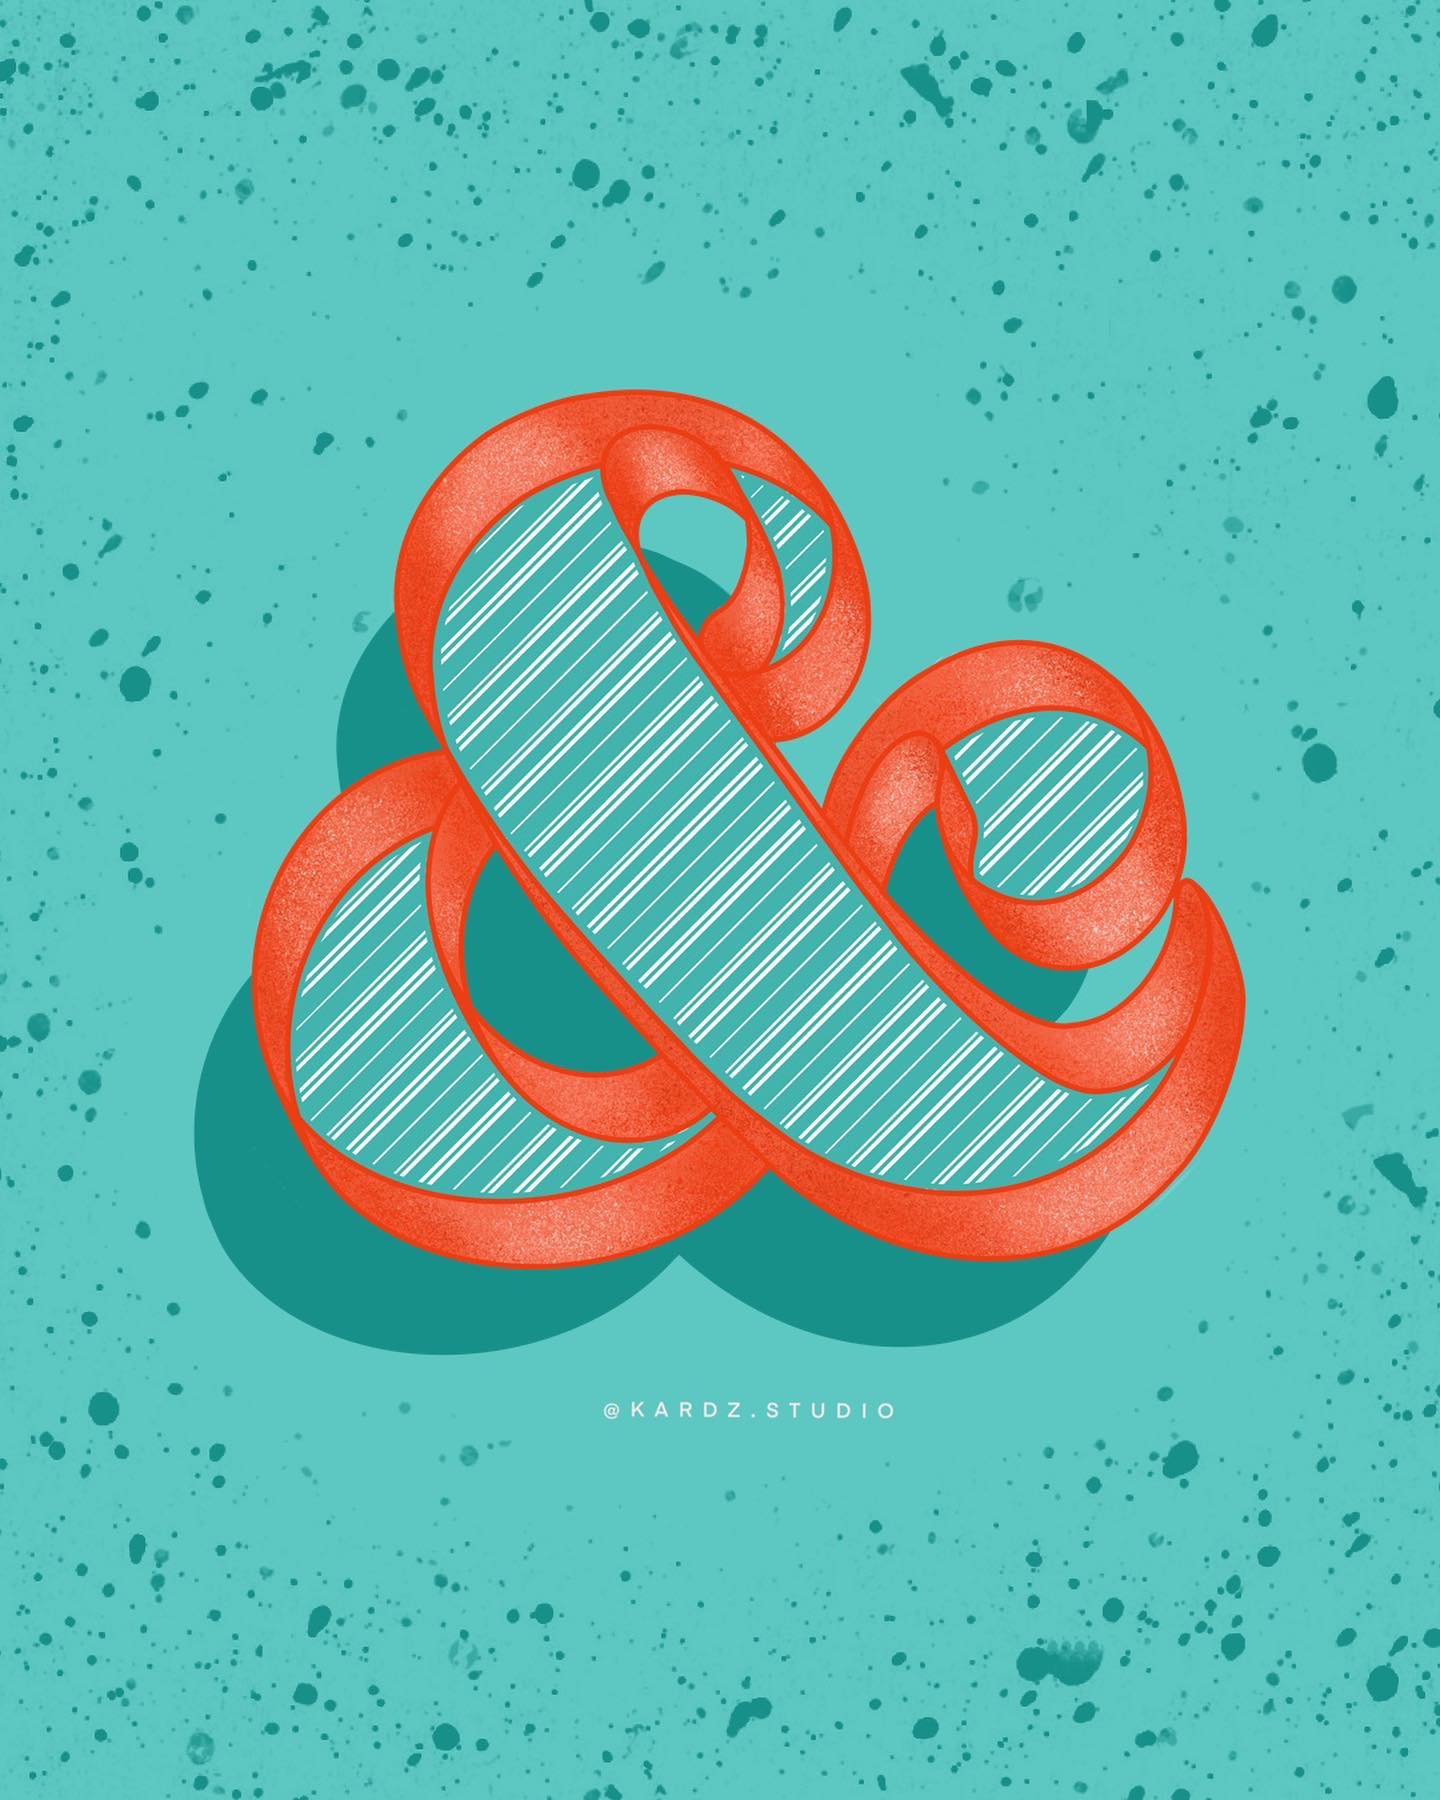 I finally did it! "Ampersand" Last prompt from the #letteringstylechallenge2023 

It was a great learning experience for